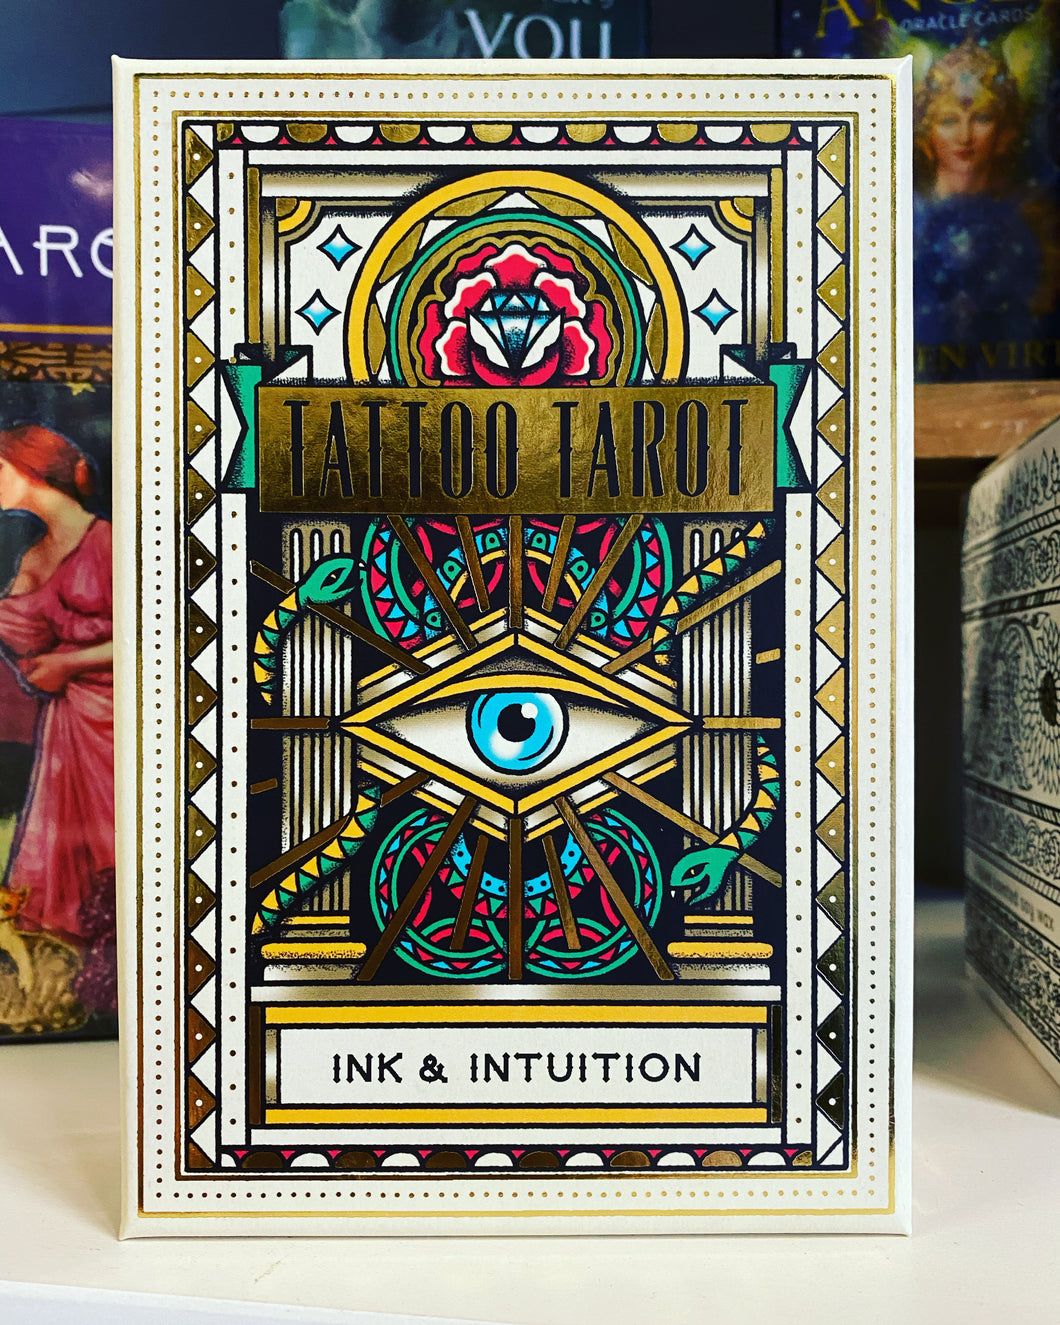 Tattoo Tarot - Ink and Intuition Oracle cards